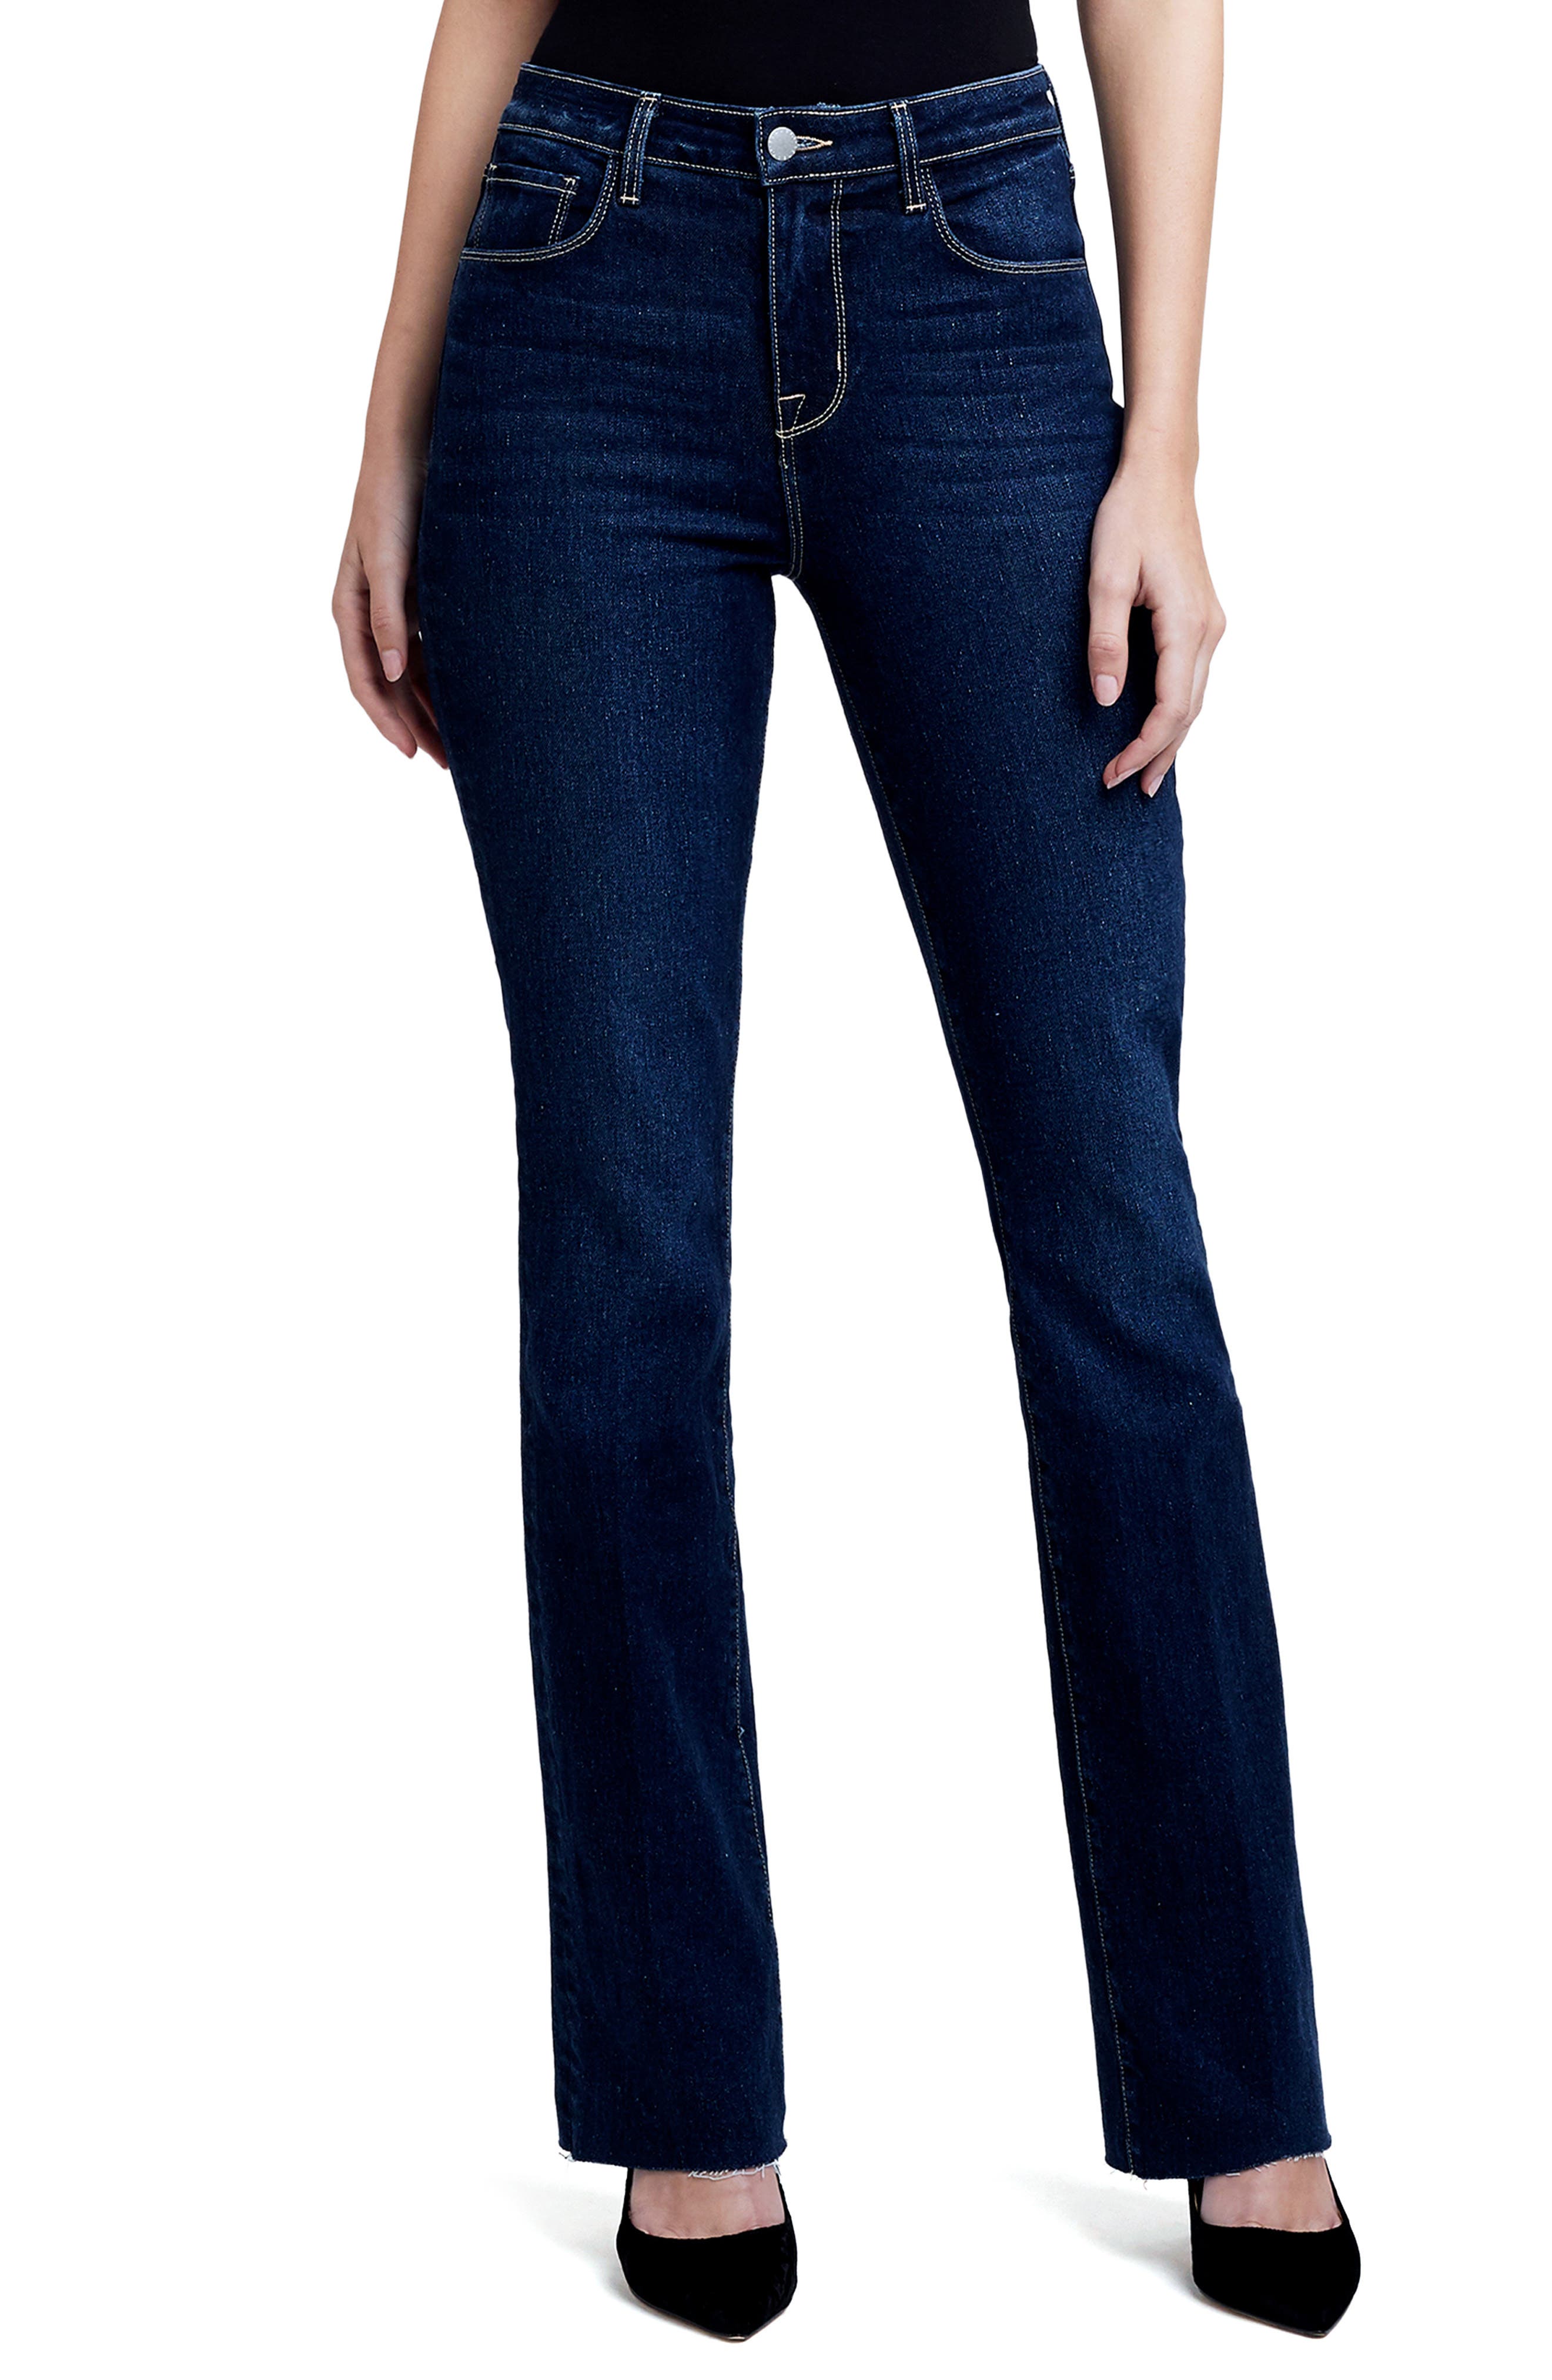 L'AGENCE Ruth High Rise Straight Leg Jeans in Gardena